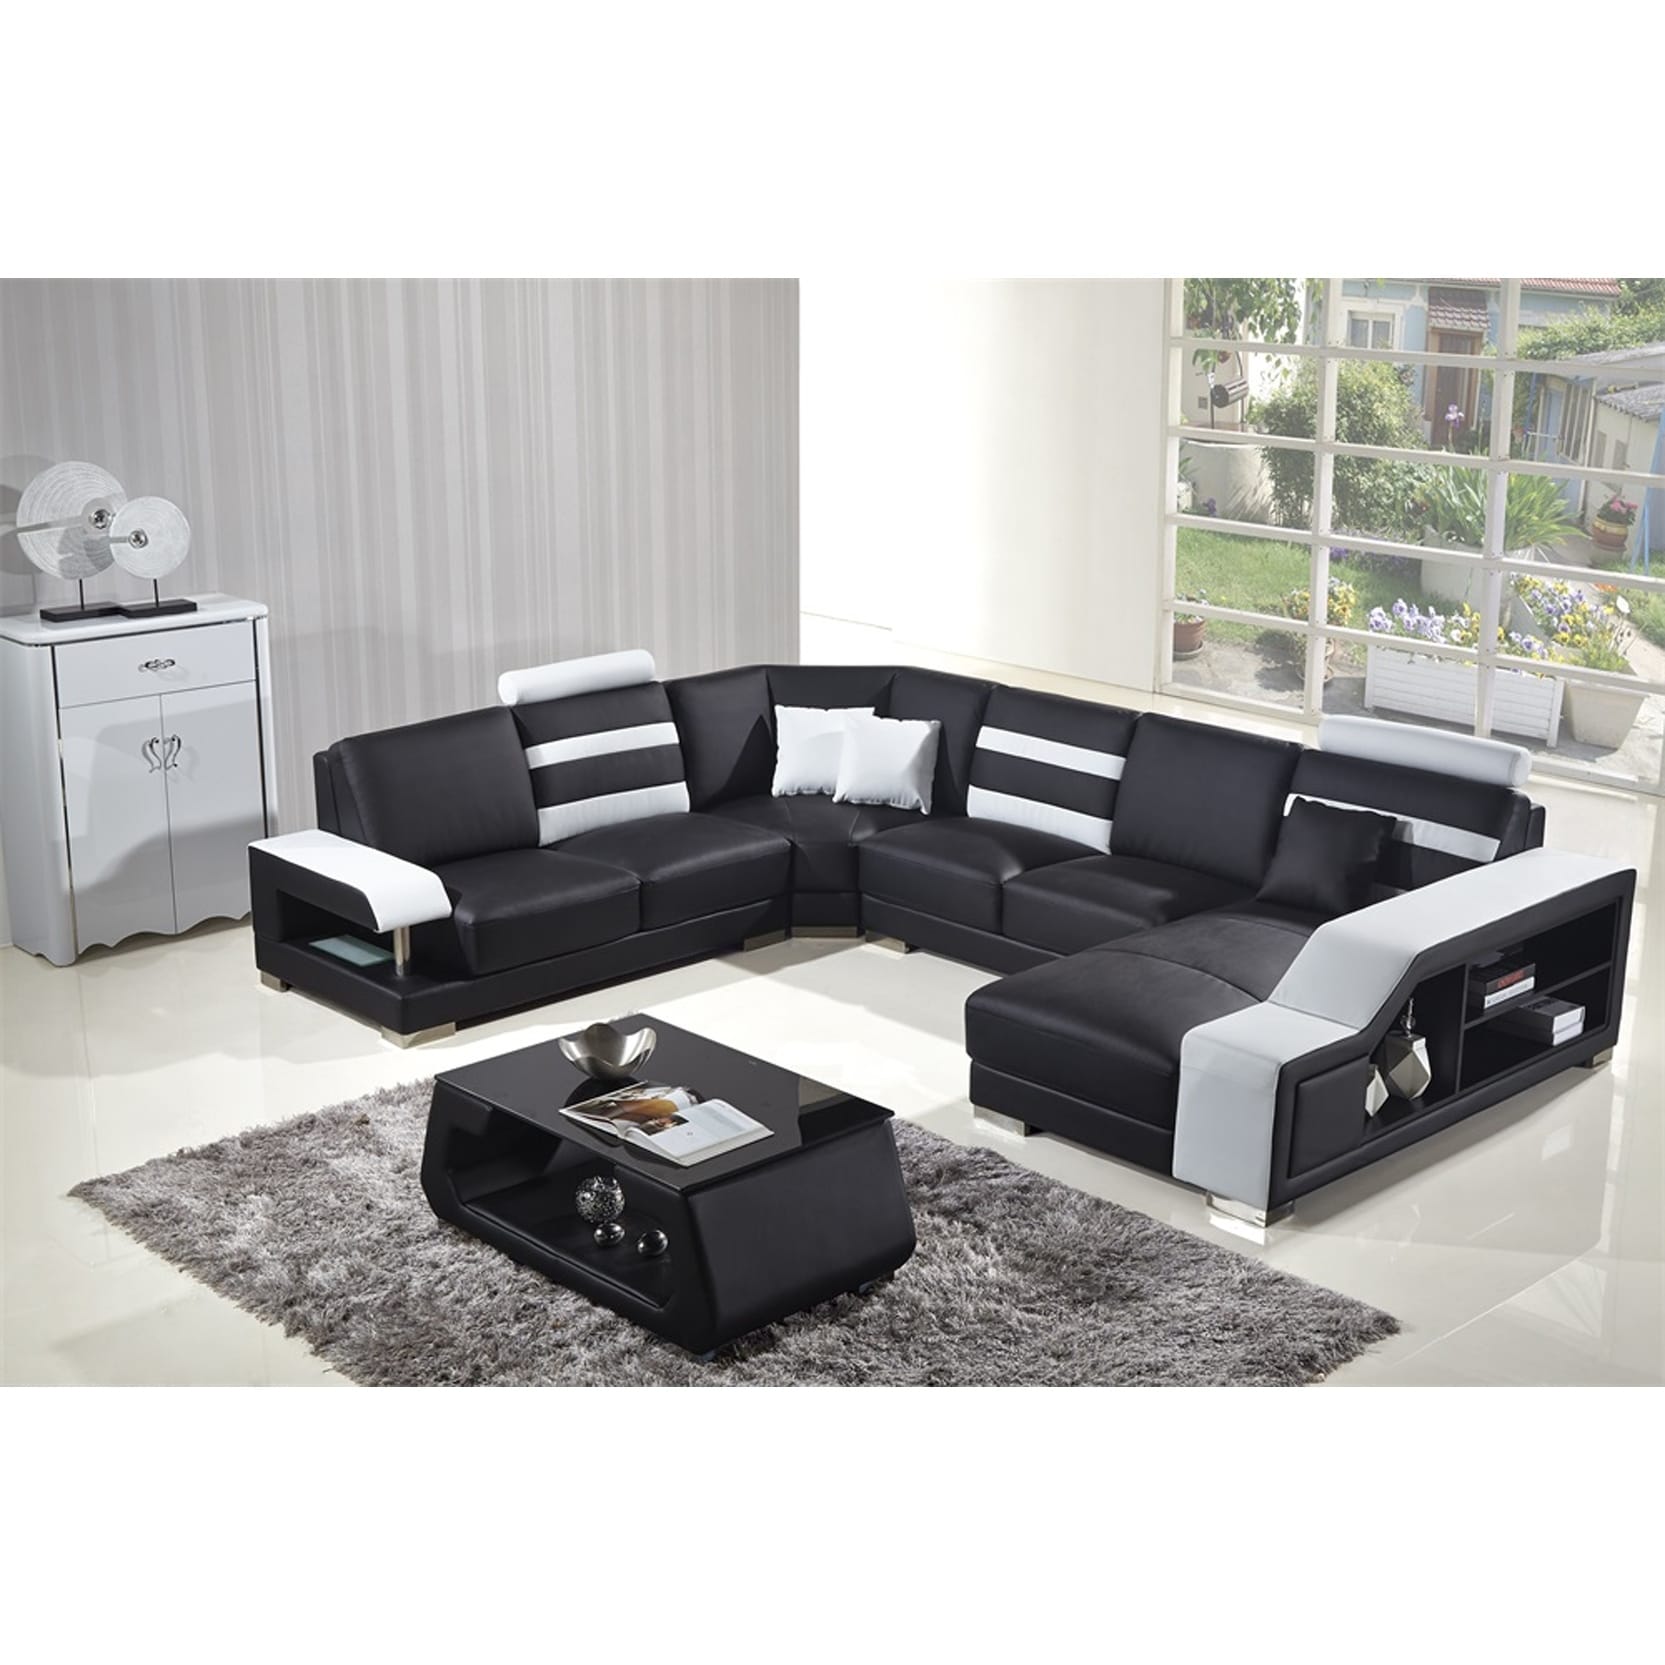 Black And White Modern Contemporary Real Leather Sectional Living Room Furniture Set With Bookshelf And Coffee Table Overstock 24241846